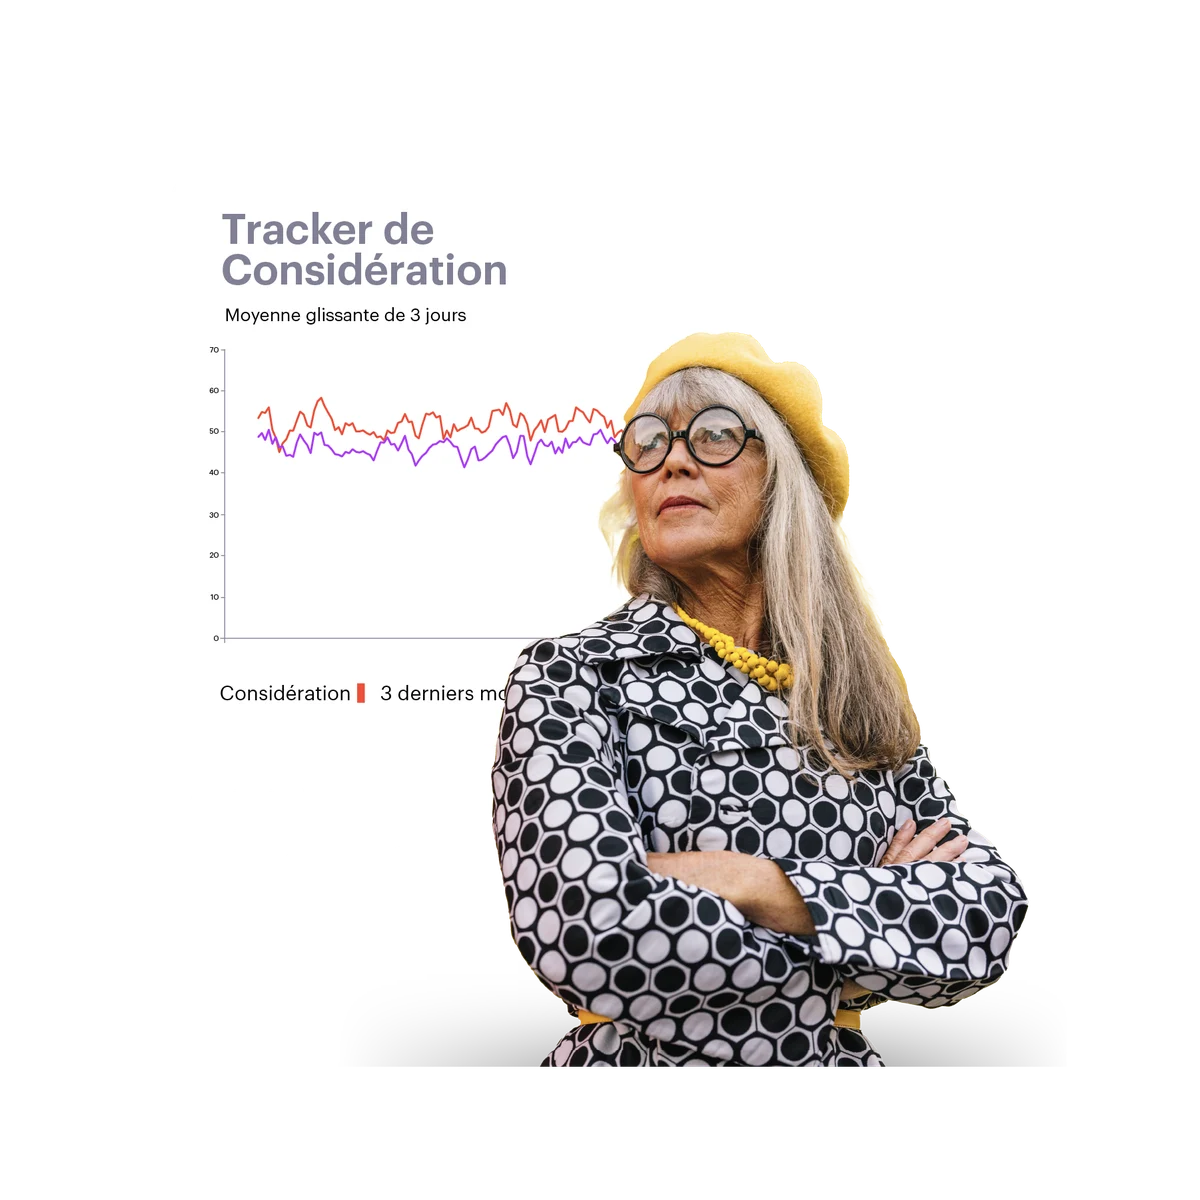 older woman with yellow hat, glasses and a consideration tracking chart in the background